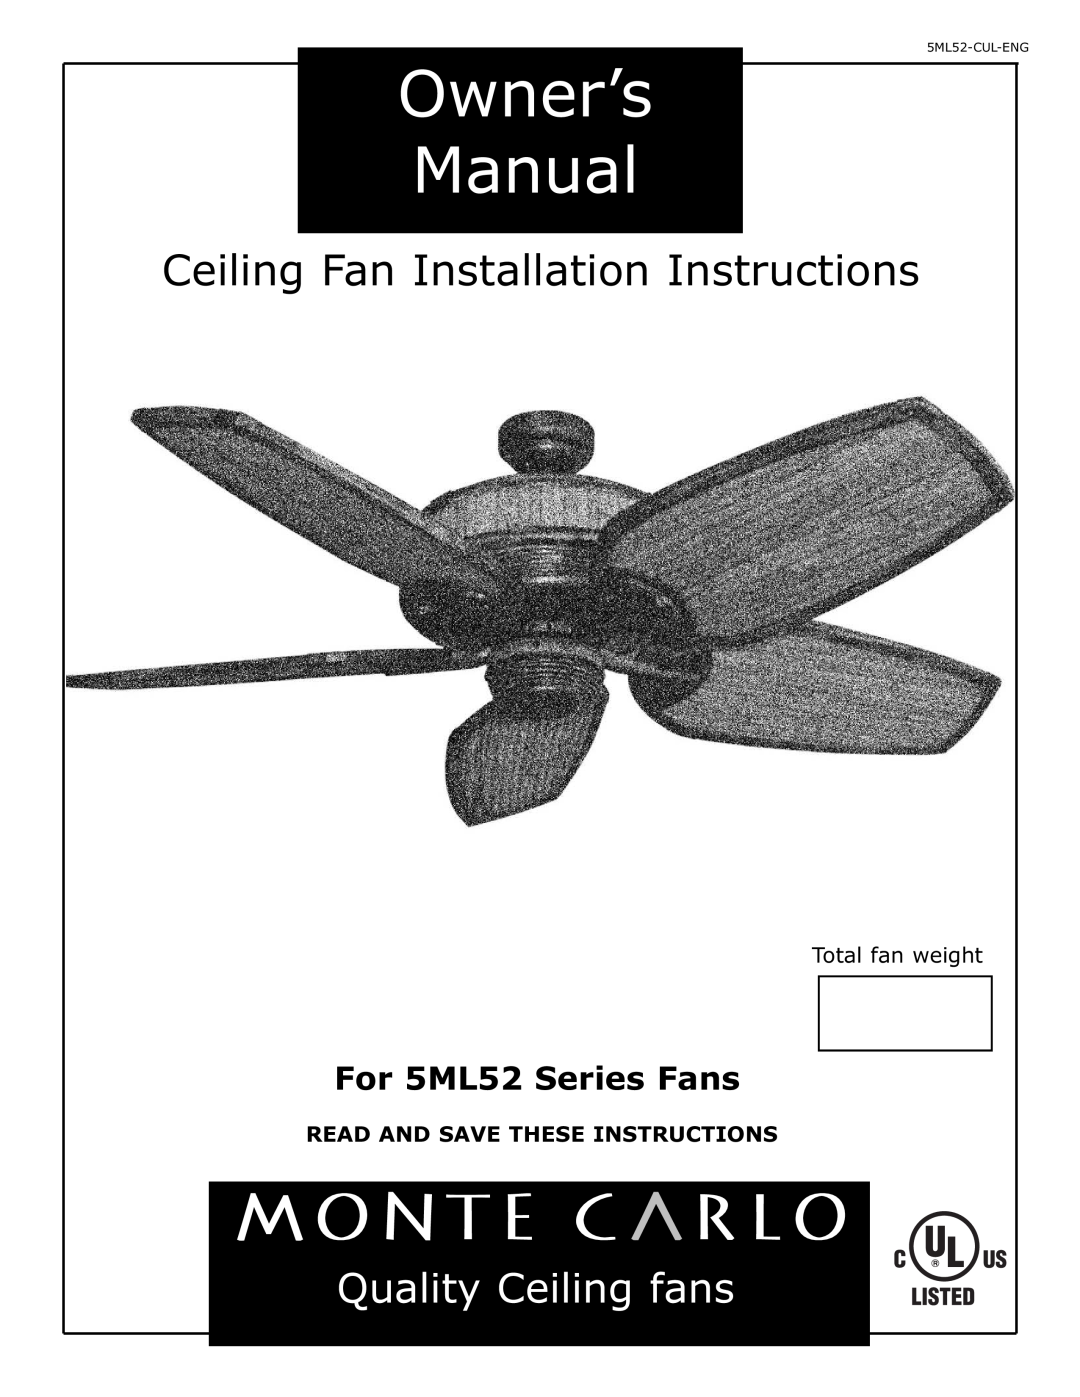 Monte Carlo Fan Company 5ML52 owner manual Read And Save These Instructions, Manual, Ceiling Fan Installation Instructions 